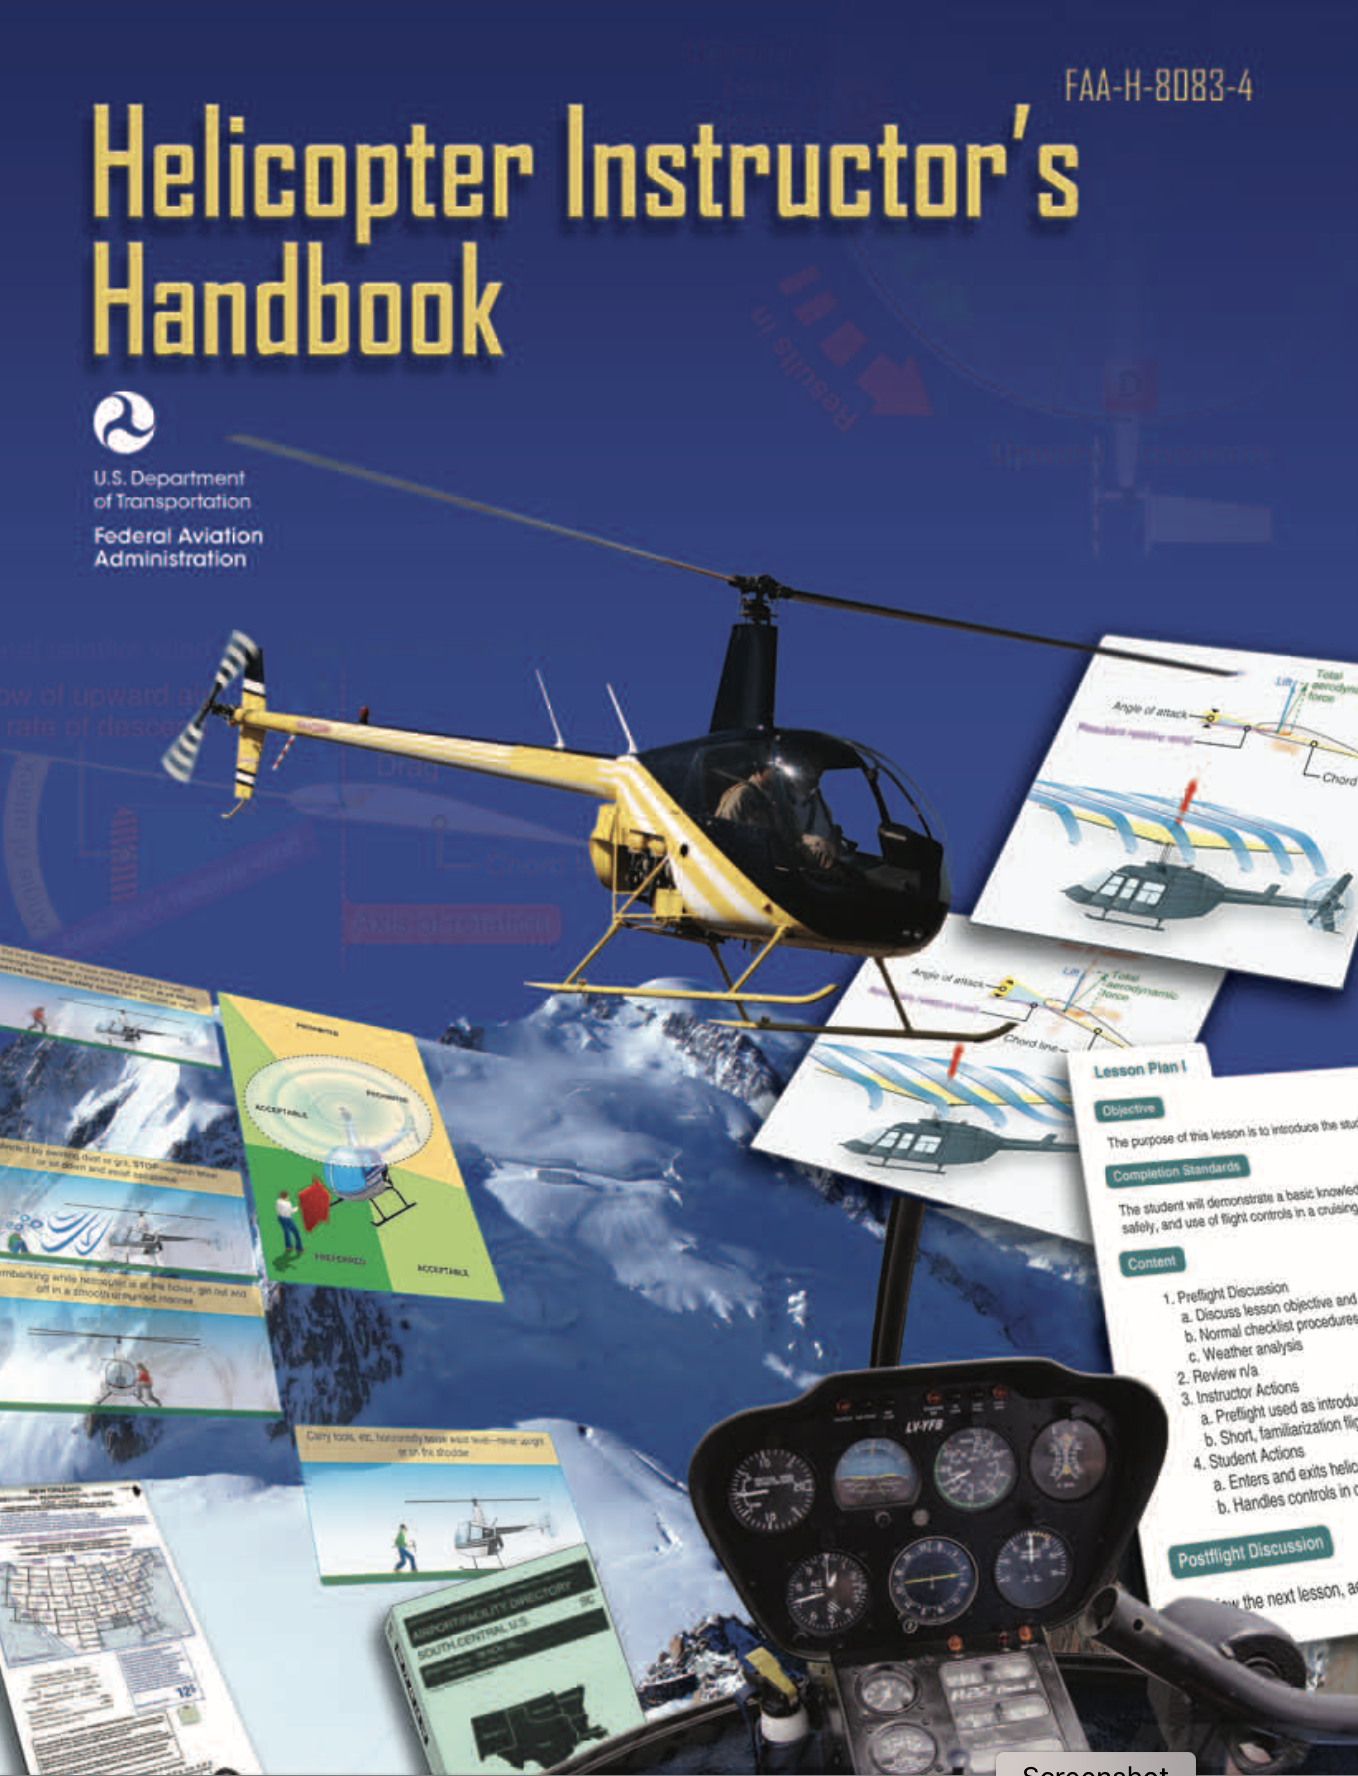 Helicopter Instructor's Handbook [FAA-H-8083-4]